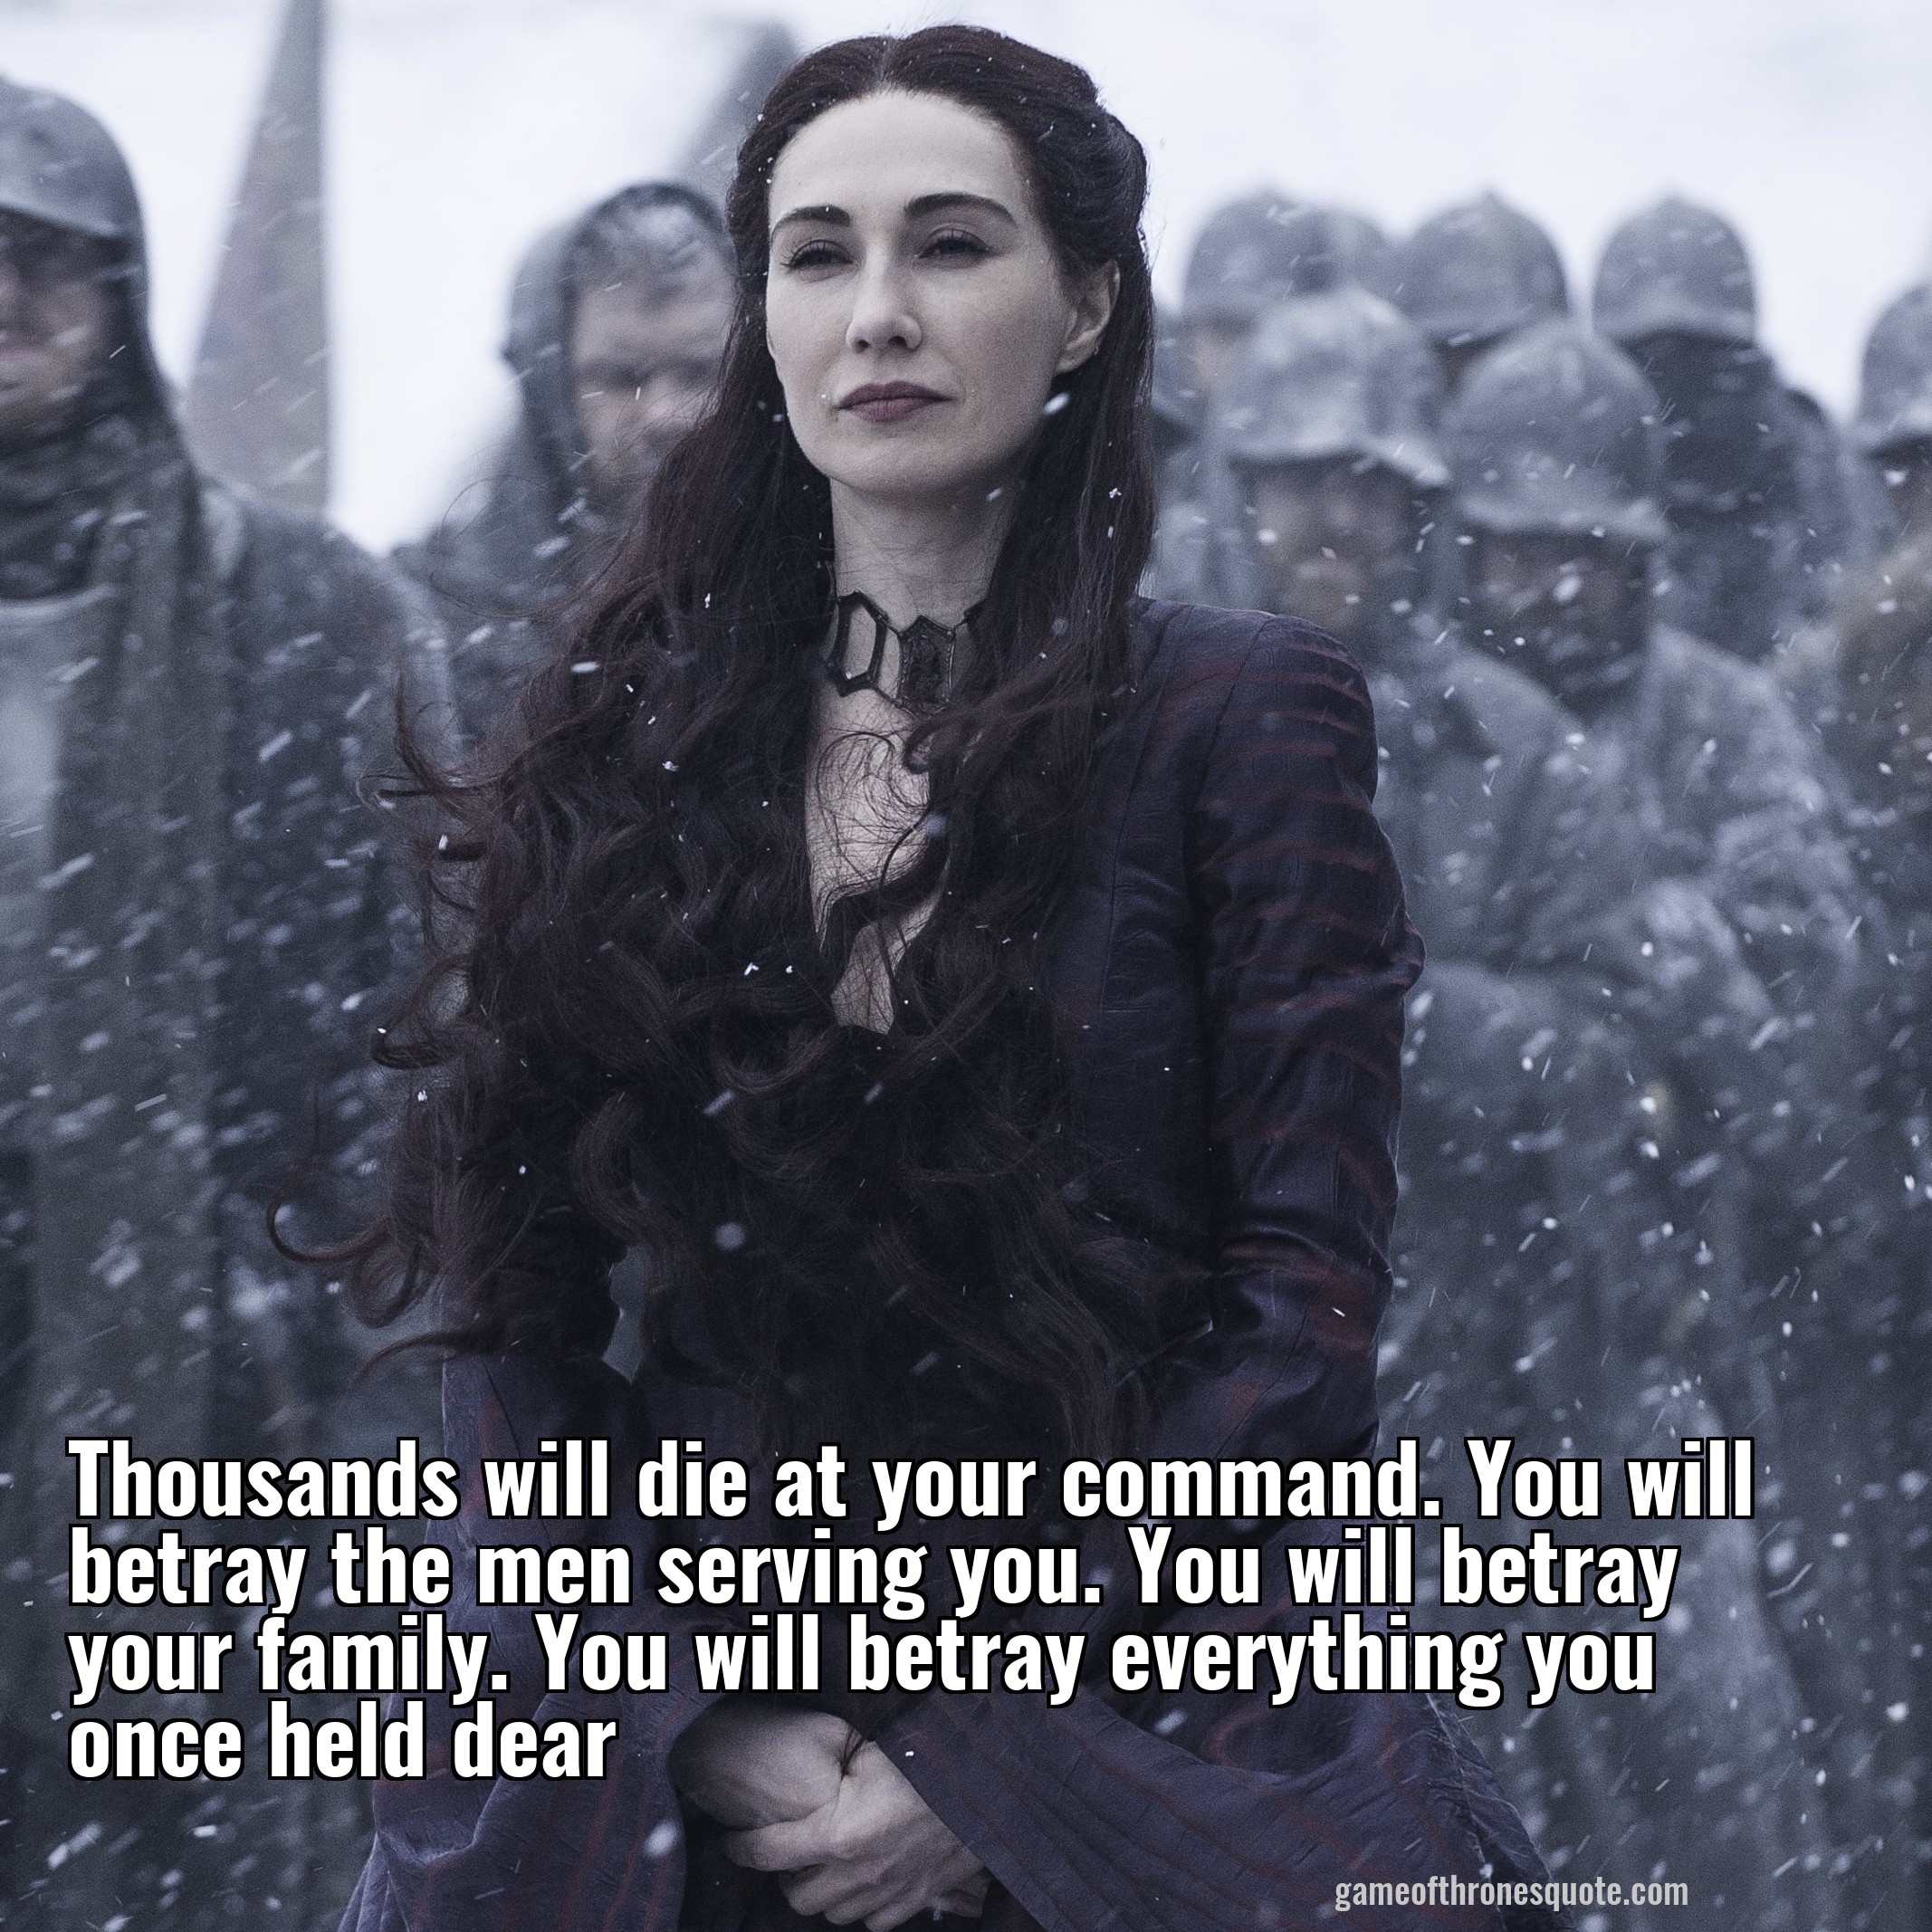 Thousands will die at your command. You will betray the men serving you. You will betray your family. You will betray everything you once held dear